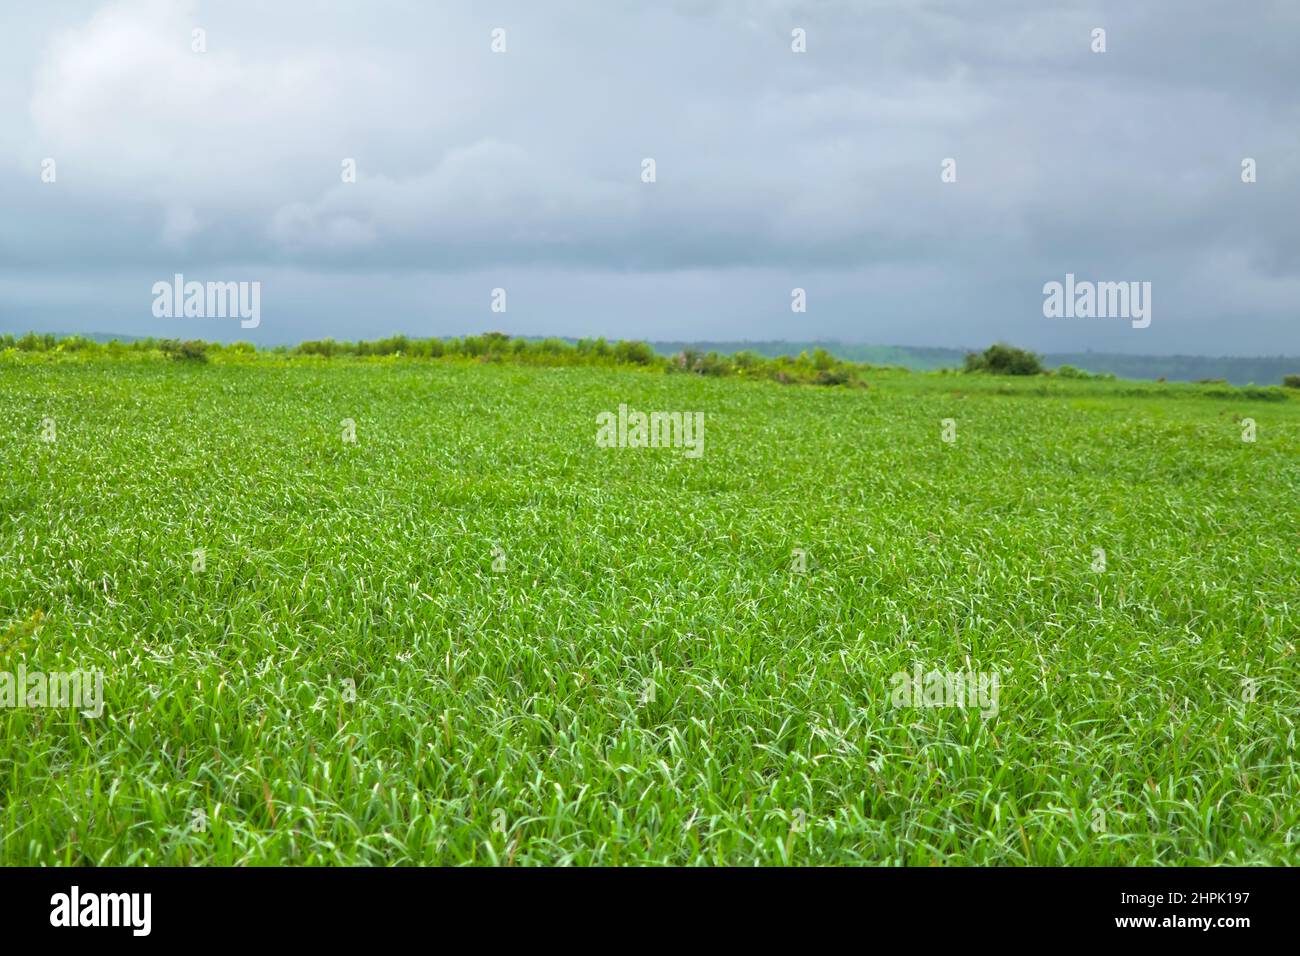 Paddy also known as rice field during monsoon season. Lush green leaf blades of paddy messed by wind and rain. Cloudy weather with hills. Stock Photo